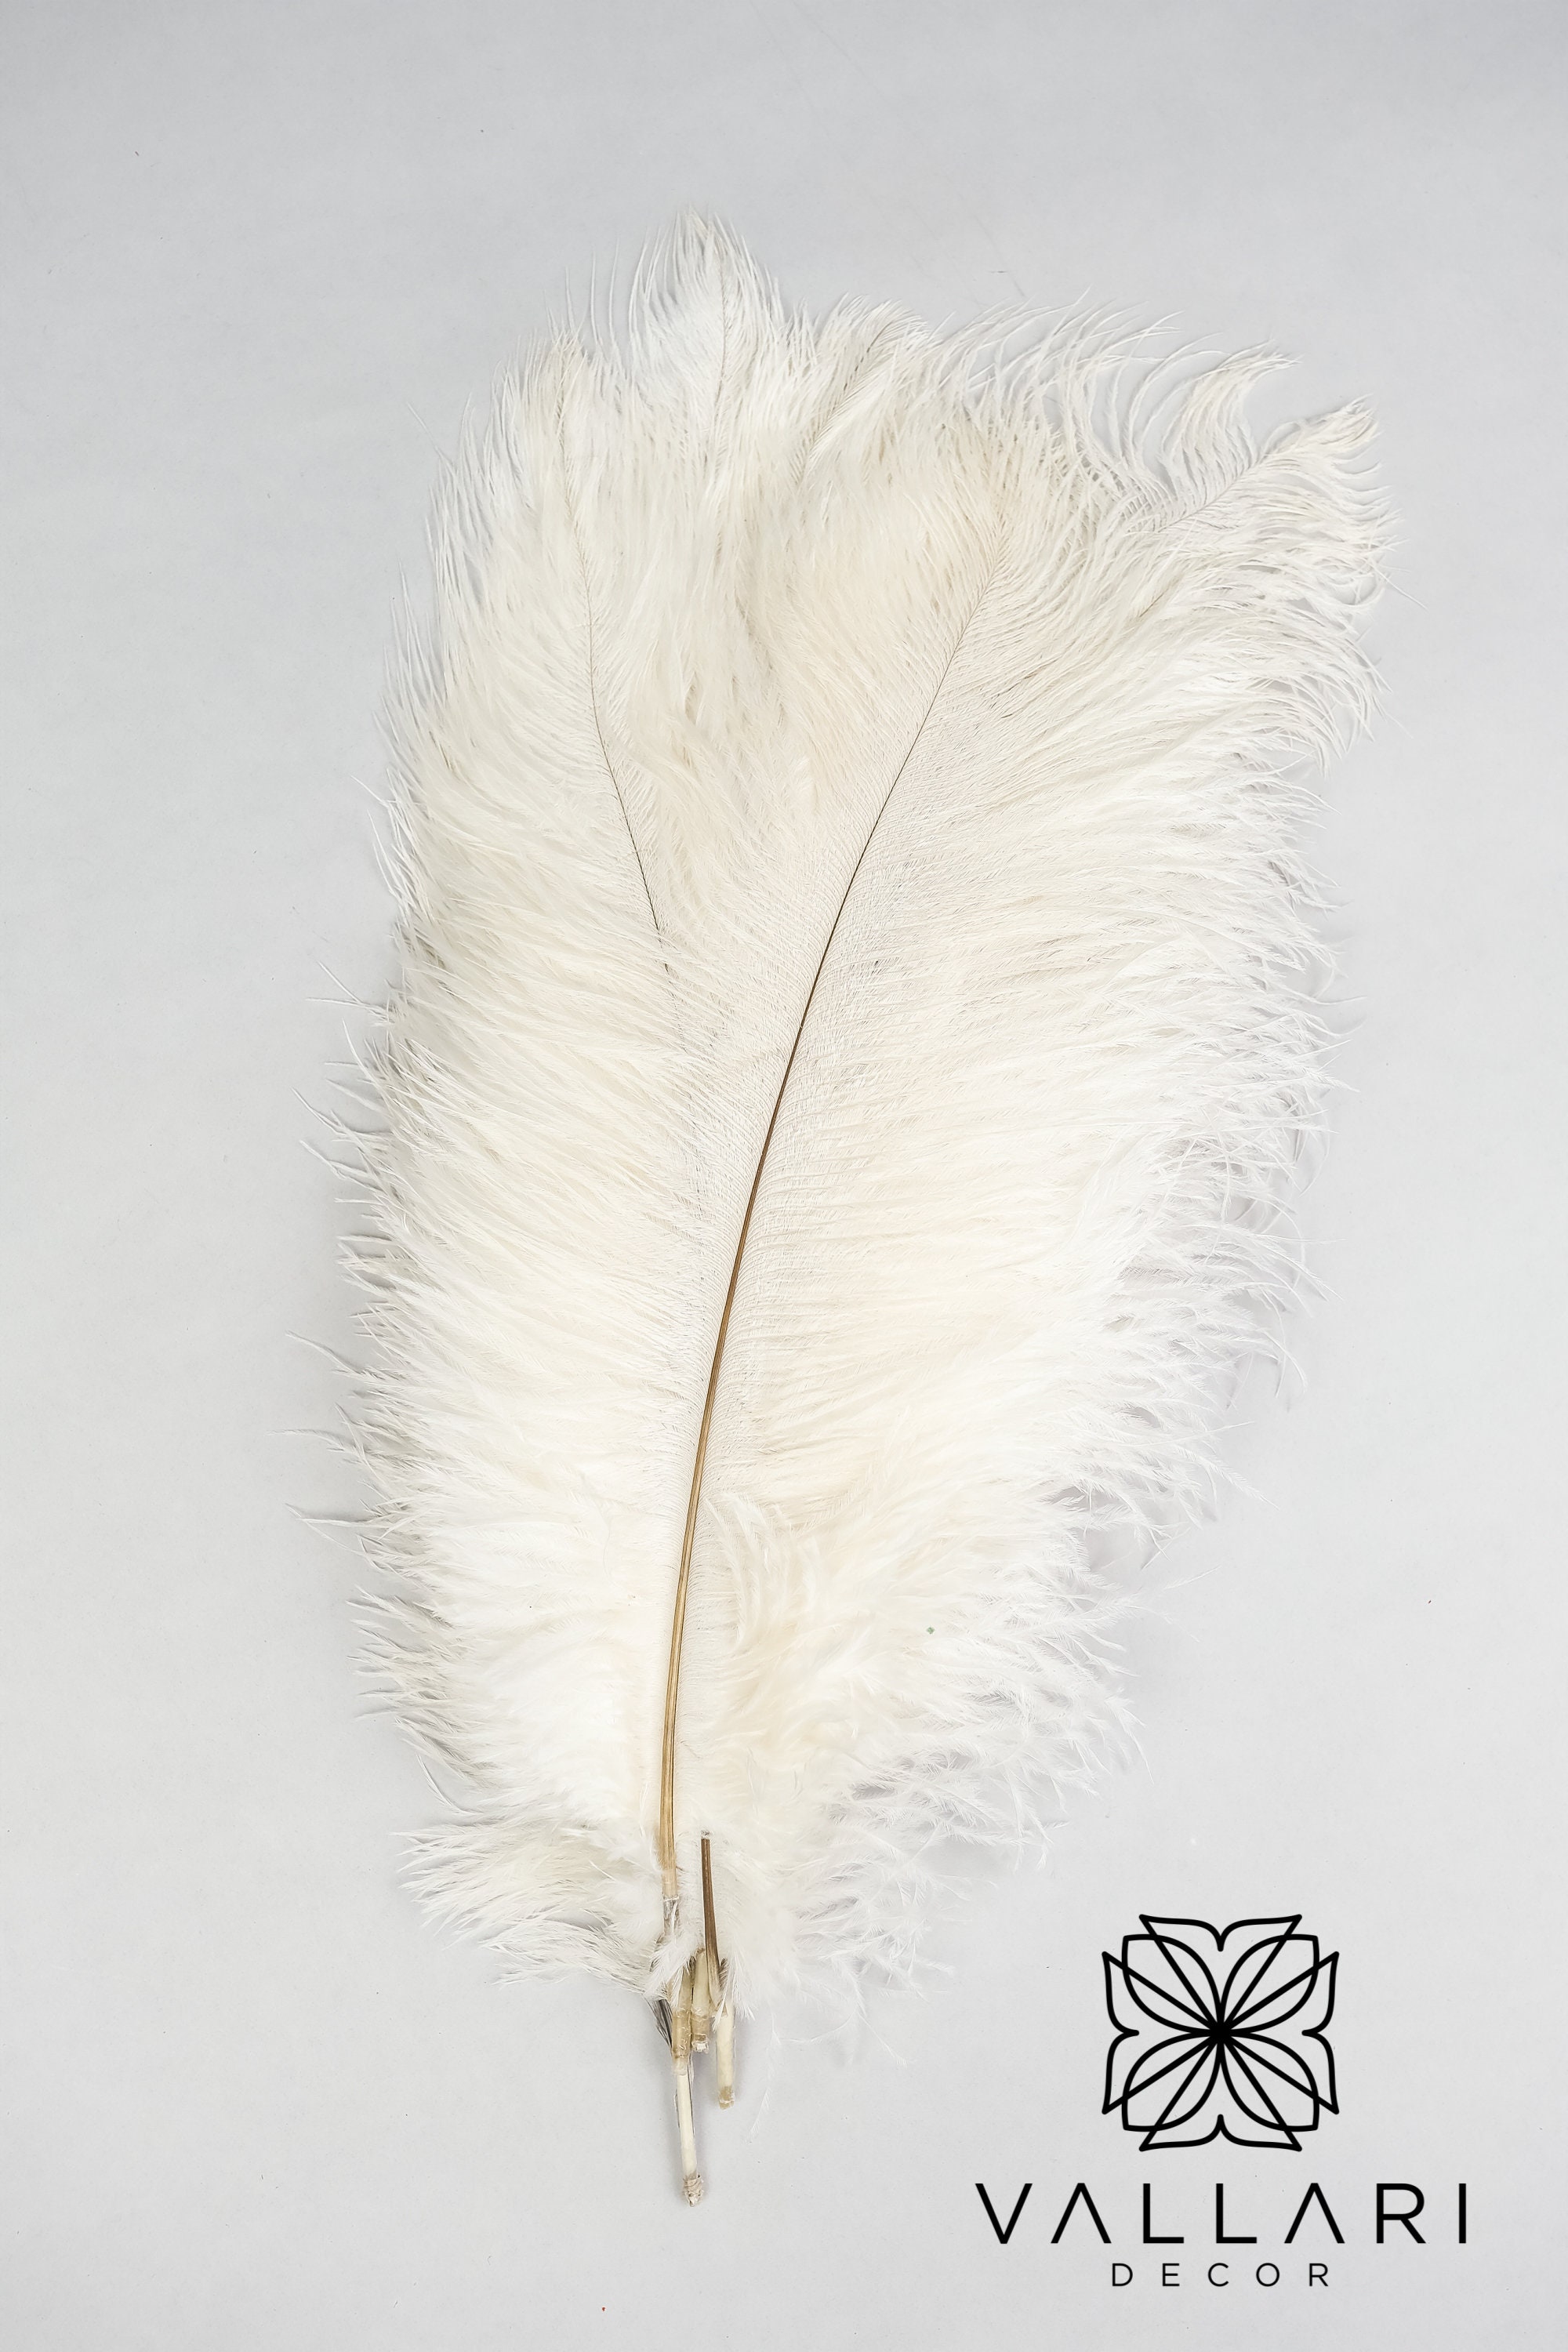 SOLD OUT! Premium Grade 1 Pure White Ostrich Feather Plumes - 24 Long x  8-10 Wide!